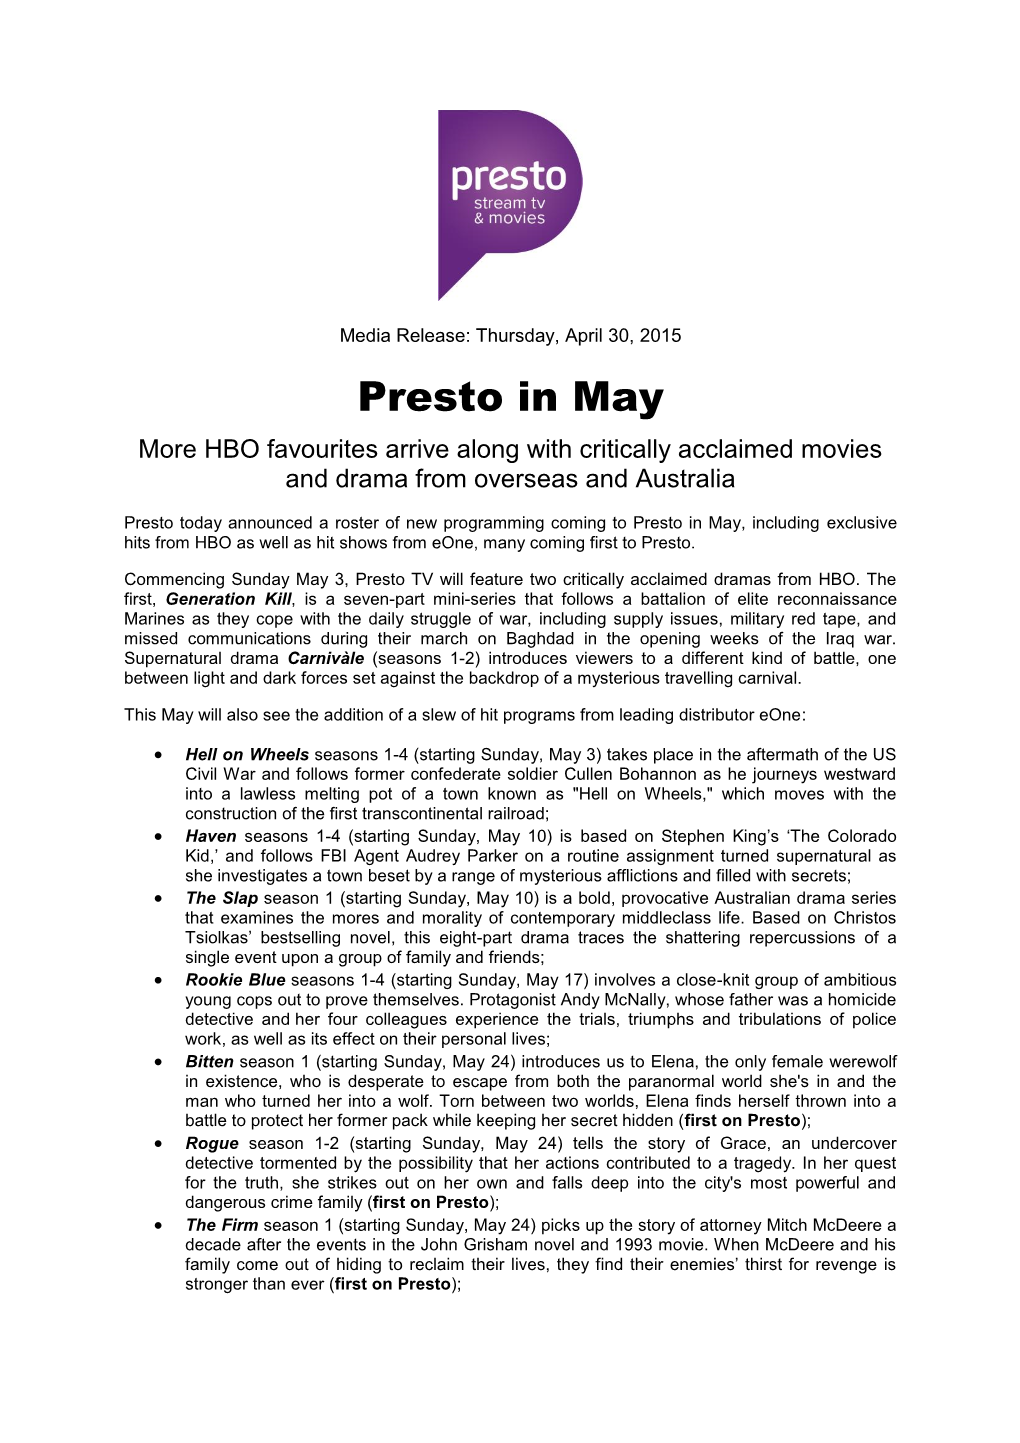 Presto in May More HBO Favourites Arrive Along with Critically Acclaimed Movies and Drama from Overseas and Australia